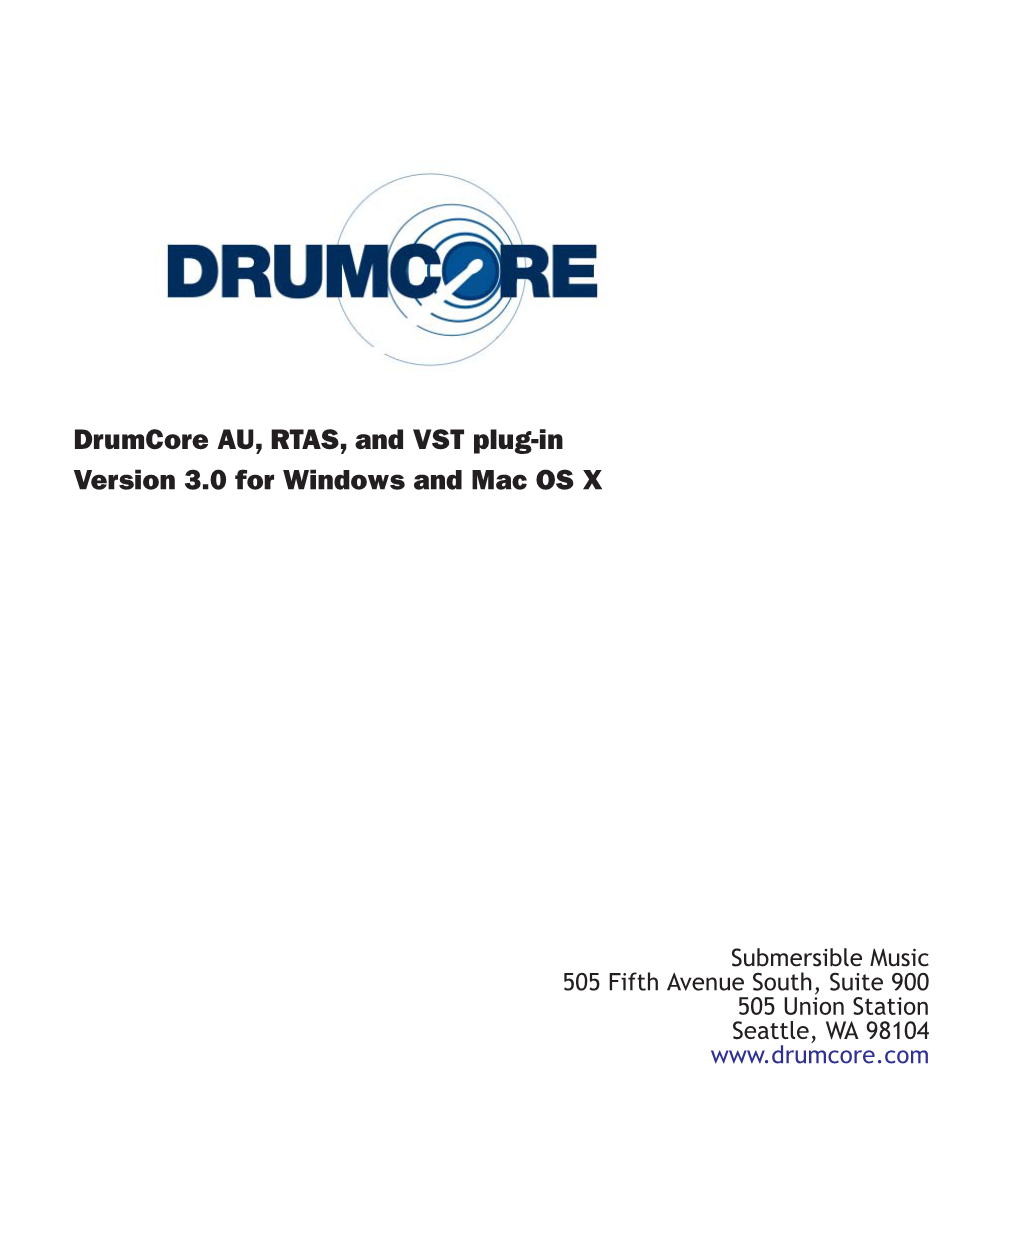 Download the Drumcore 3 Plug-In User Guide